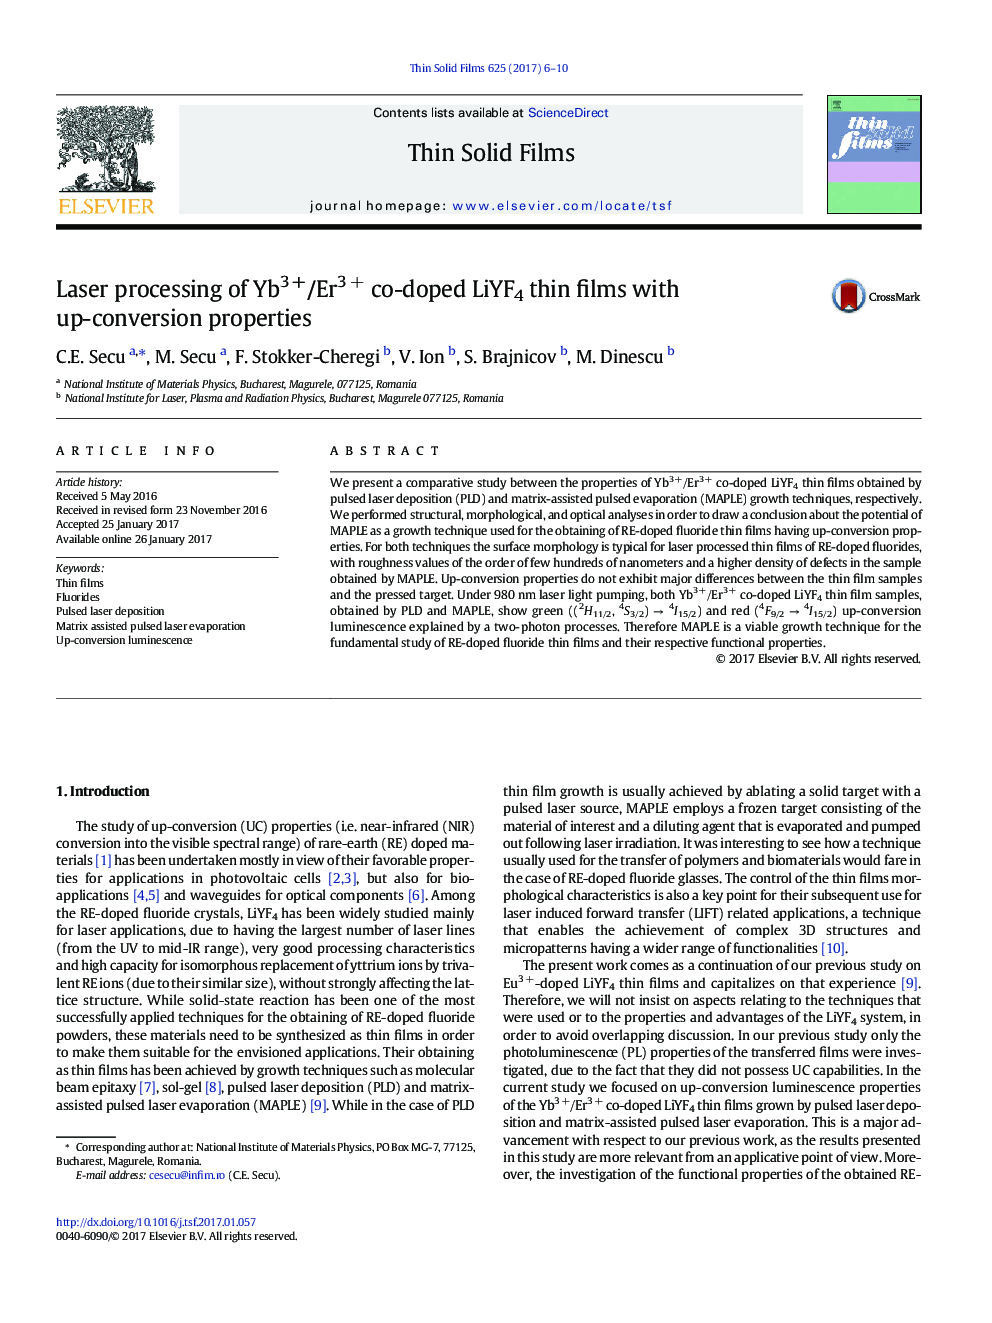 Laser processing of Yb3Â +/Er3Â + co-doped LiYF4 thin films with up-conversion properties